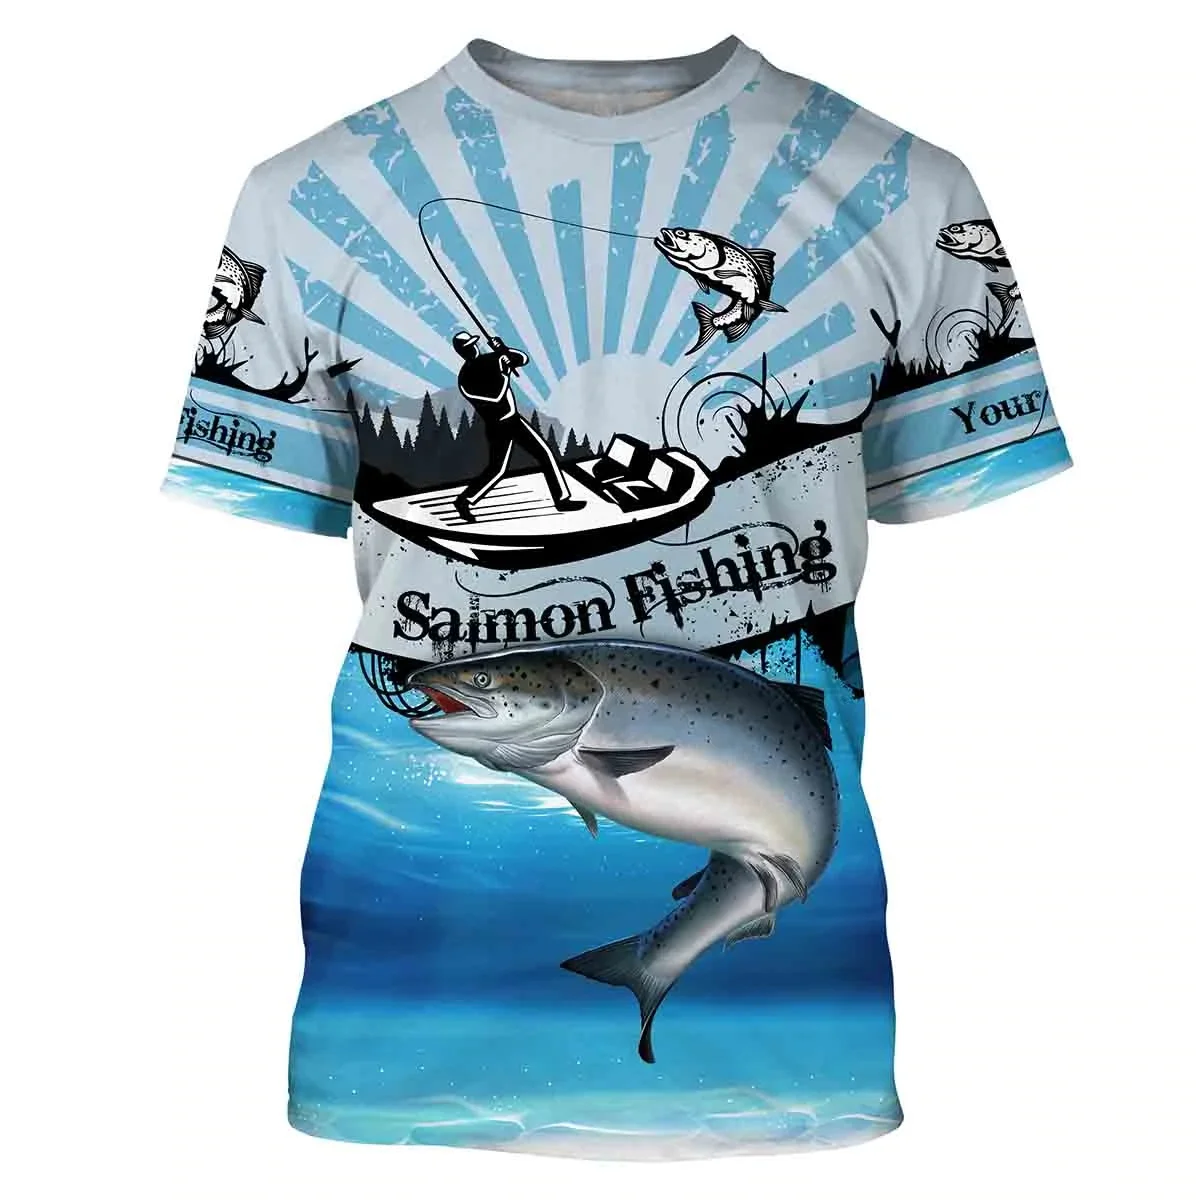 salmon fishing Customize name and team 3D All Over Printed Mens t shirt  Cool Summer Unisex Casual Short sleeve T-shirt TX264